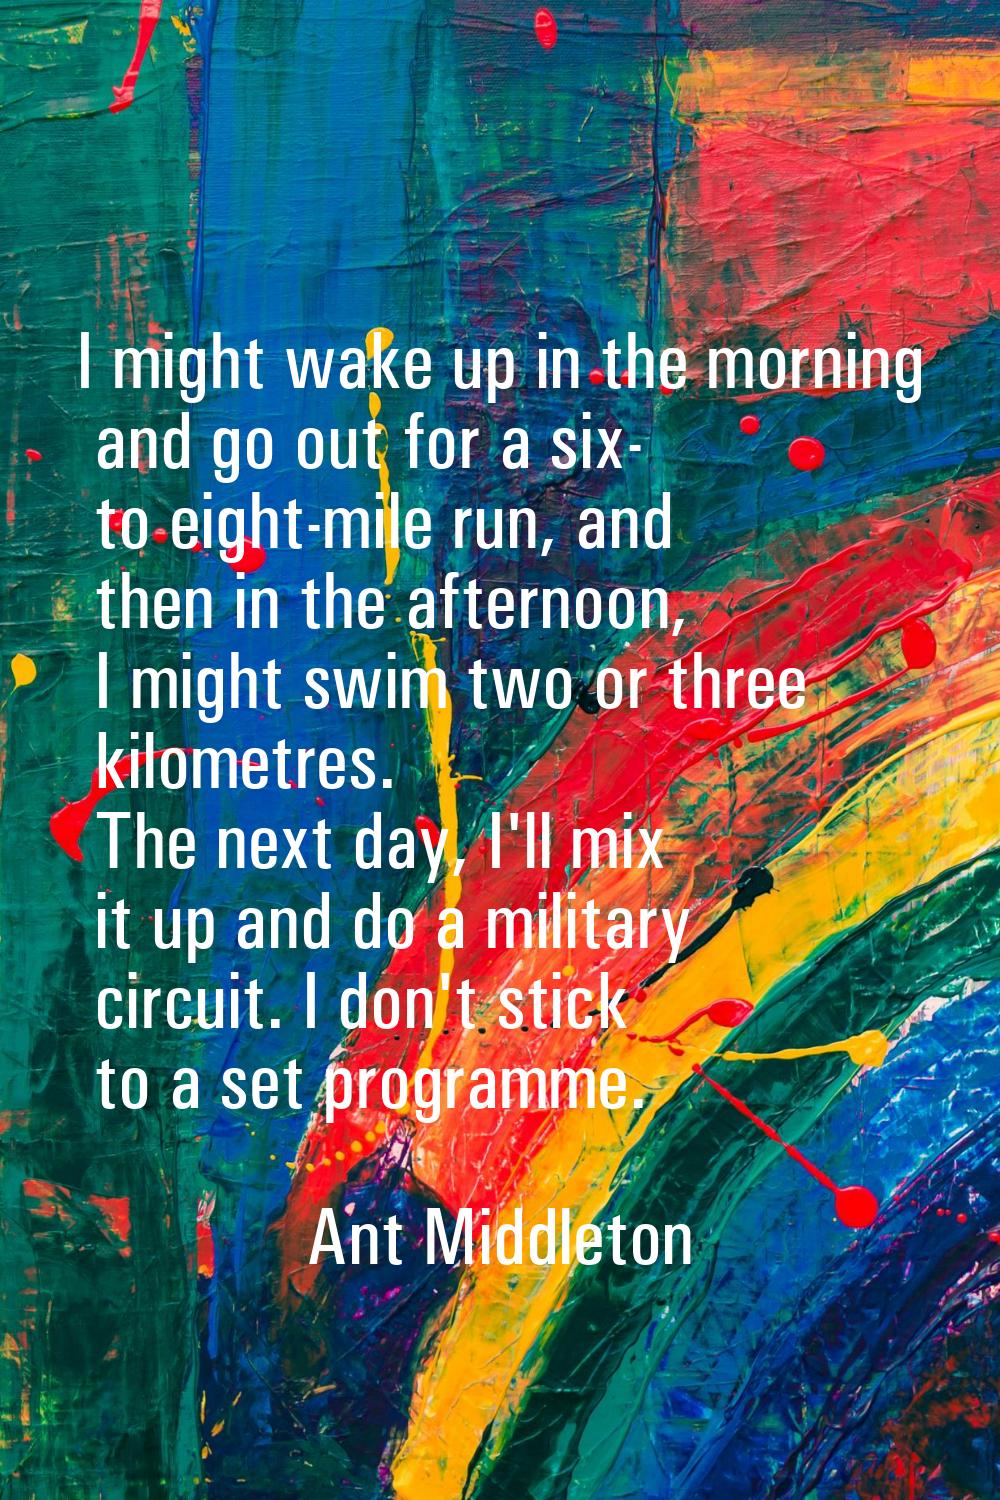 I might wake up in the morning and go out for a six- to eight-mile run, and then in the afternoon, 